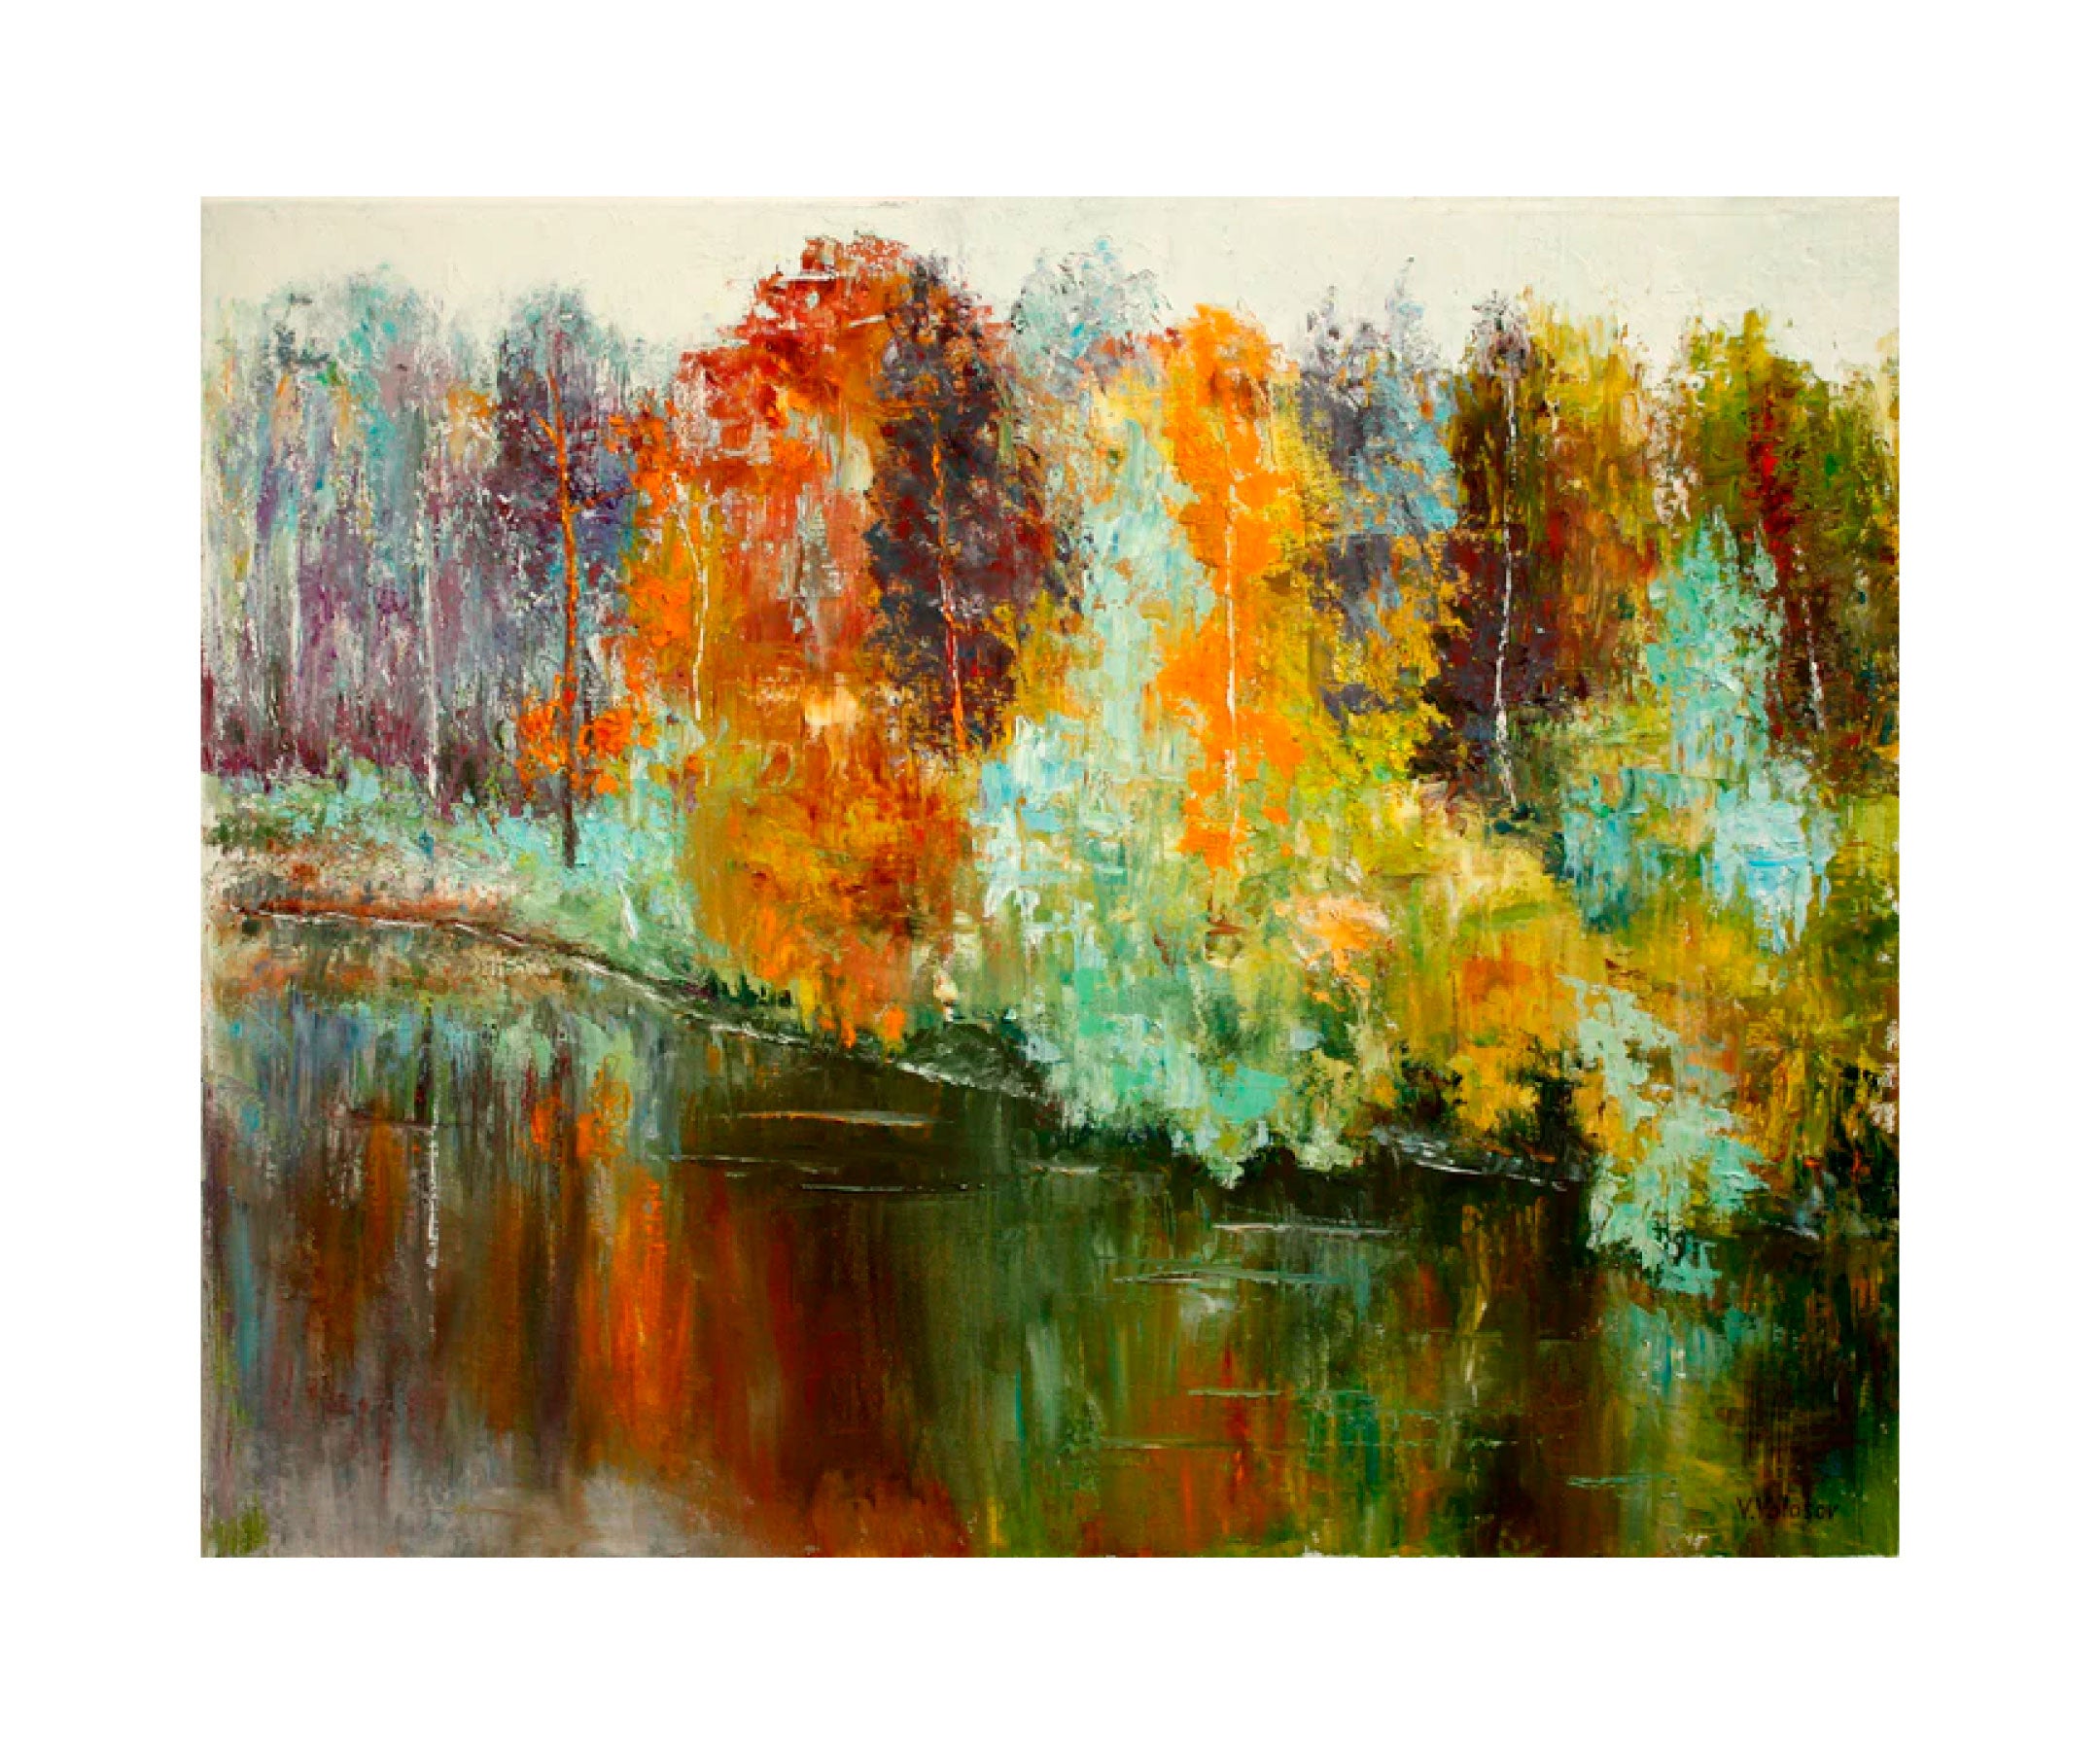 'AUTUMN FOREST COLORS' - Oil on Canvas